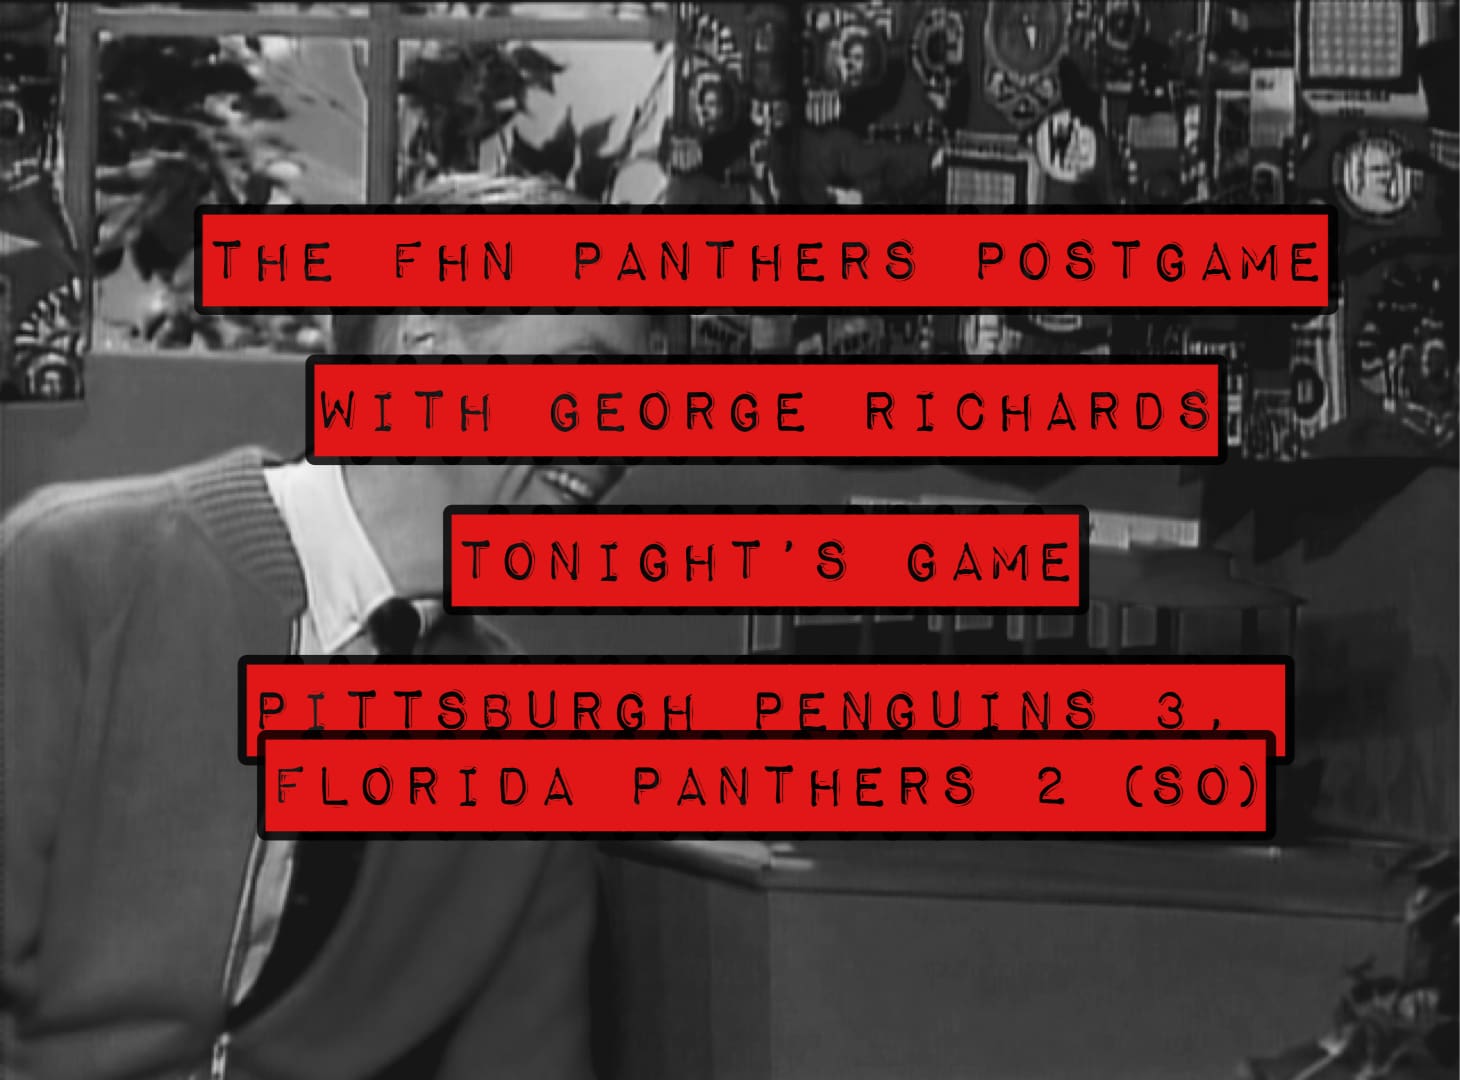 Fhn panthers postgame penguins